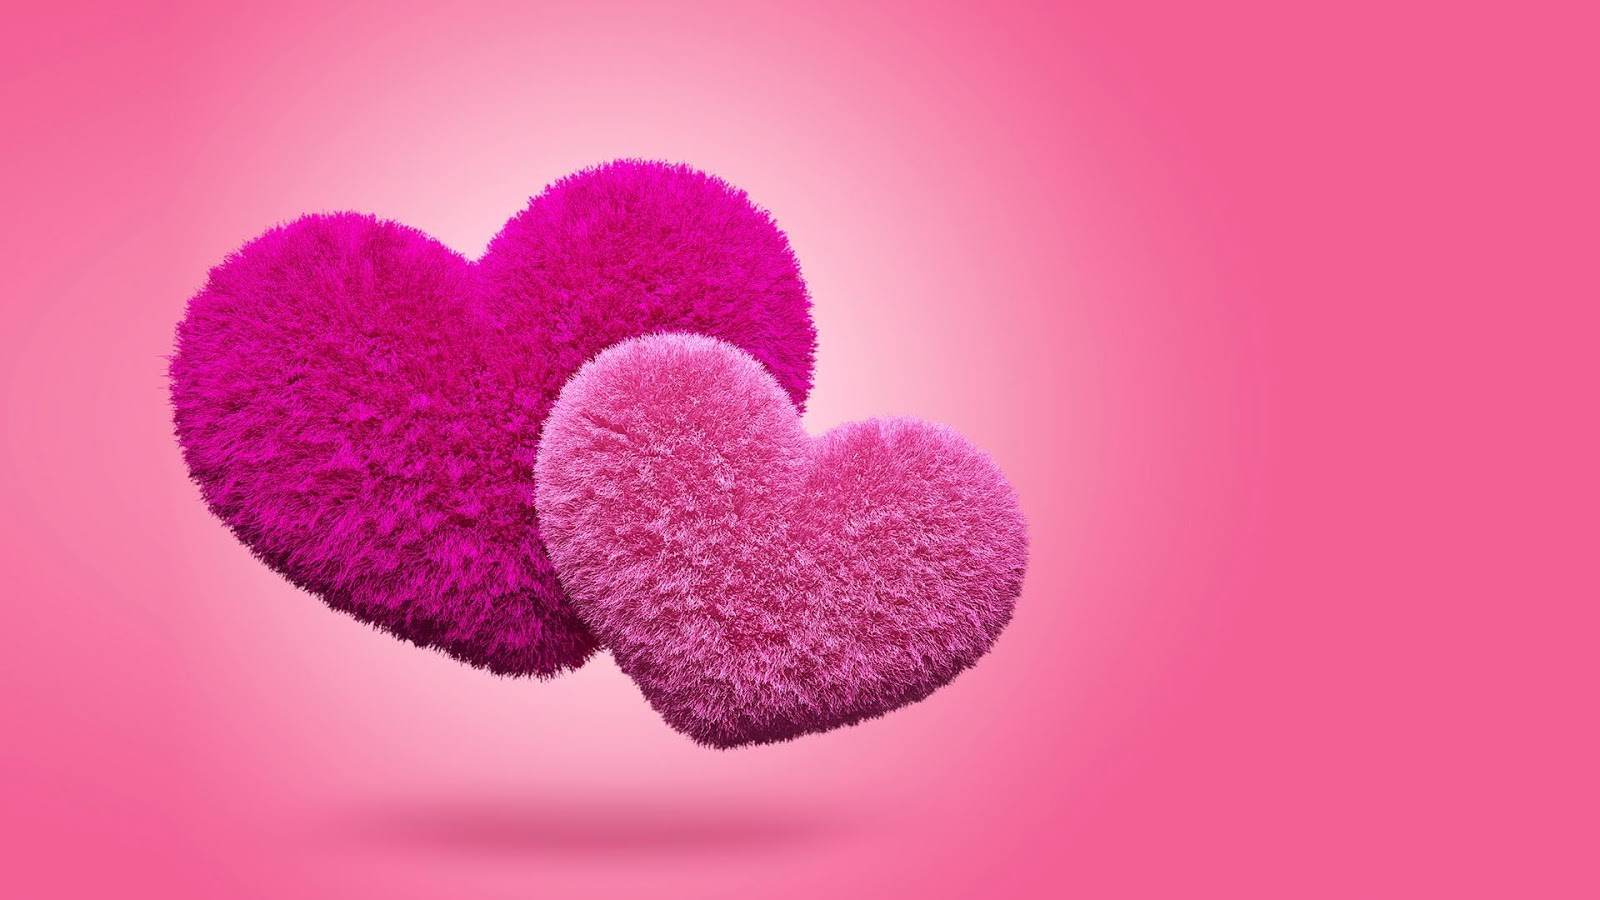 Fluffy Hearts Live Wallpaper - Android Apps on Google Play